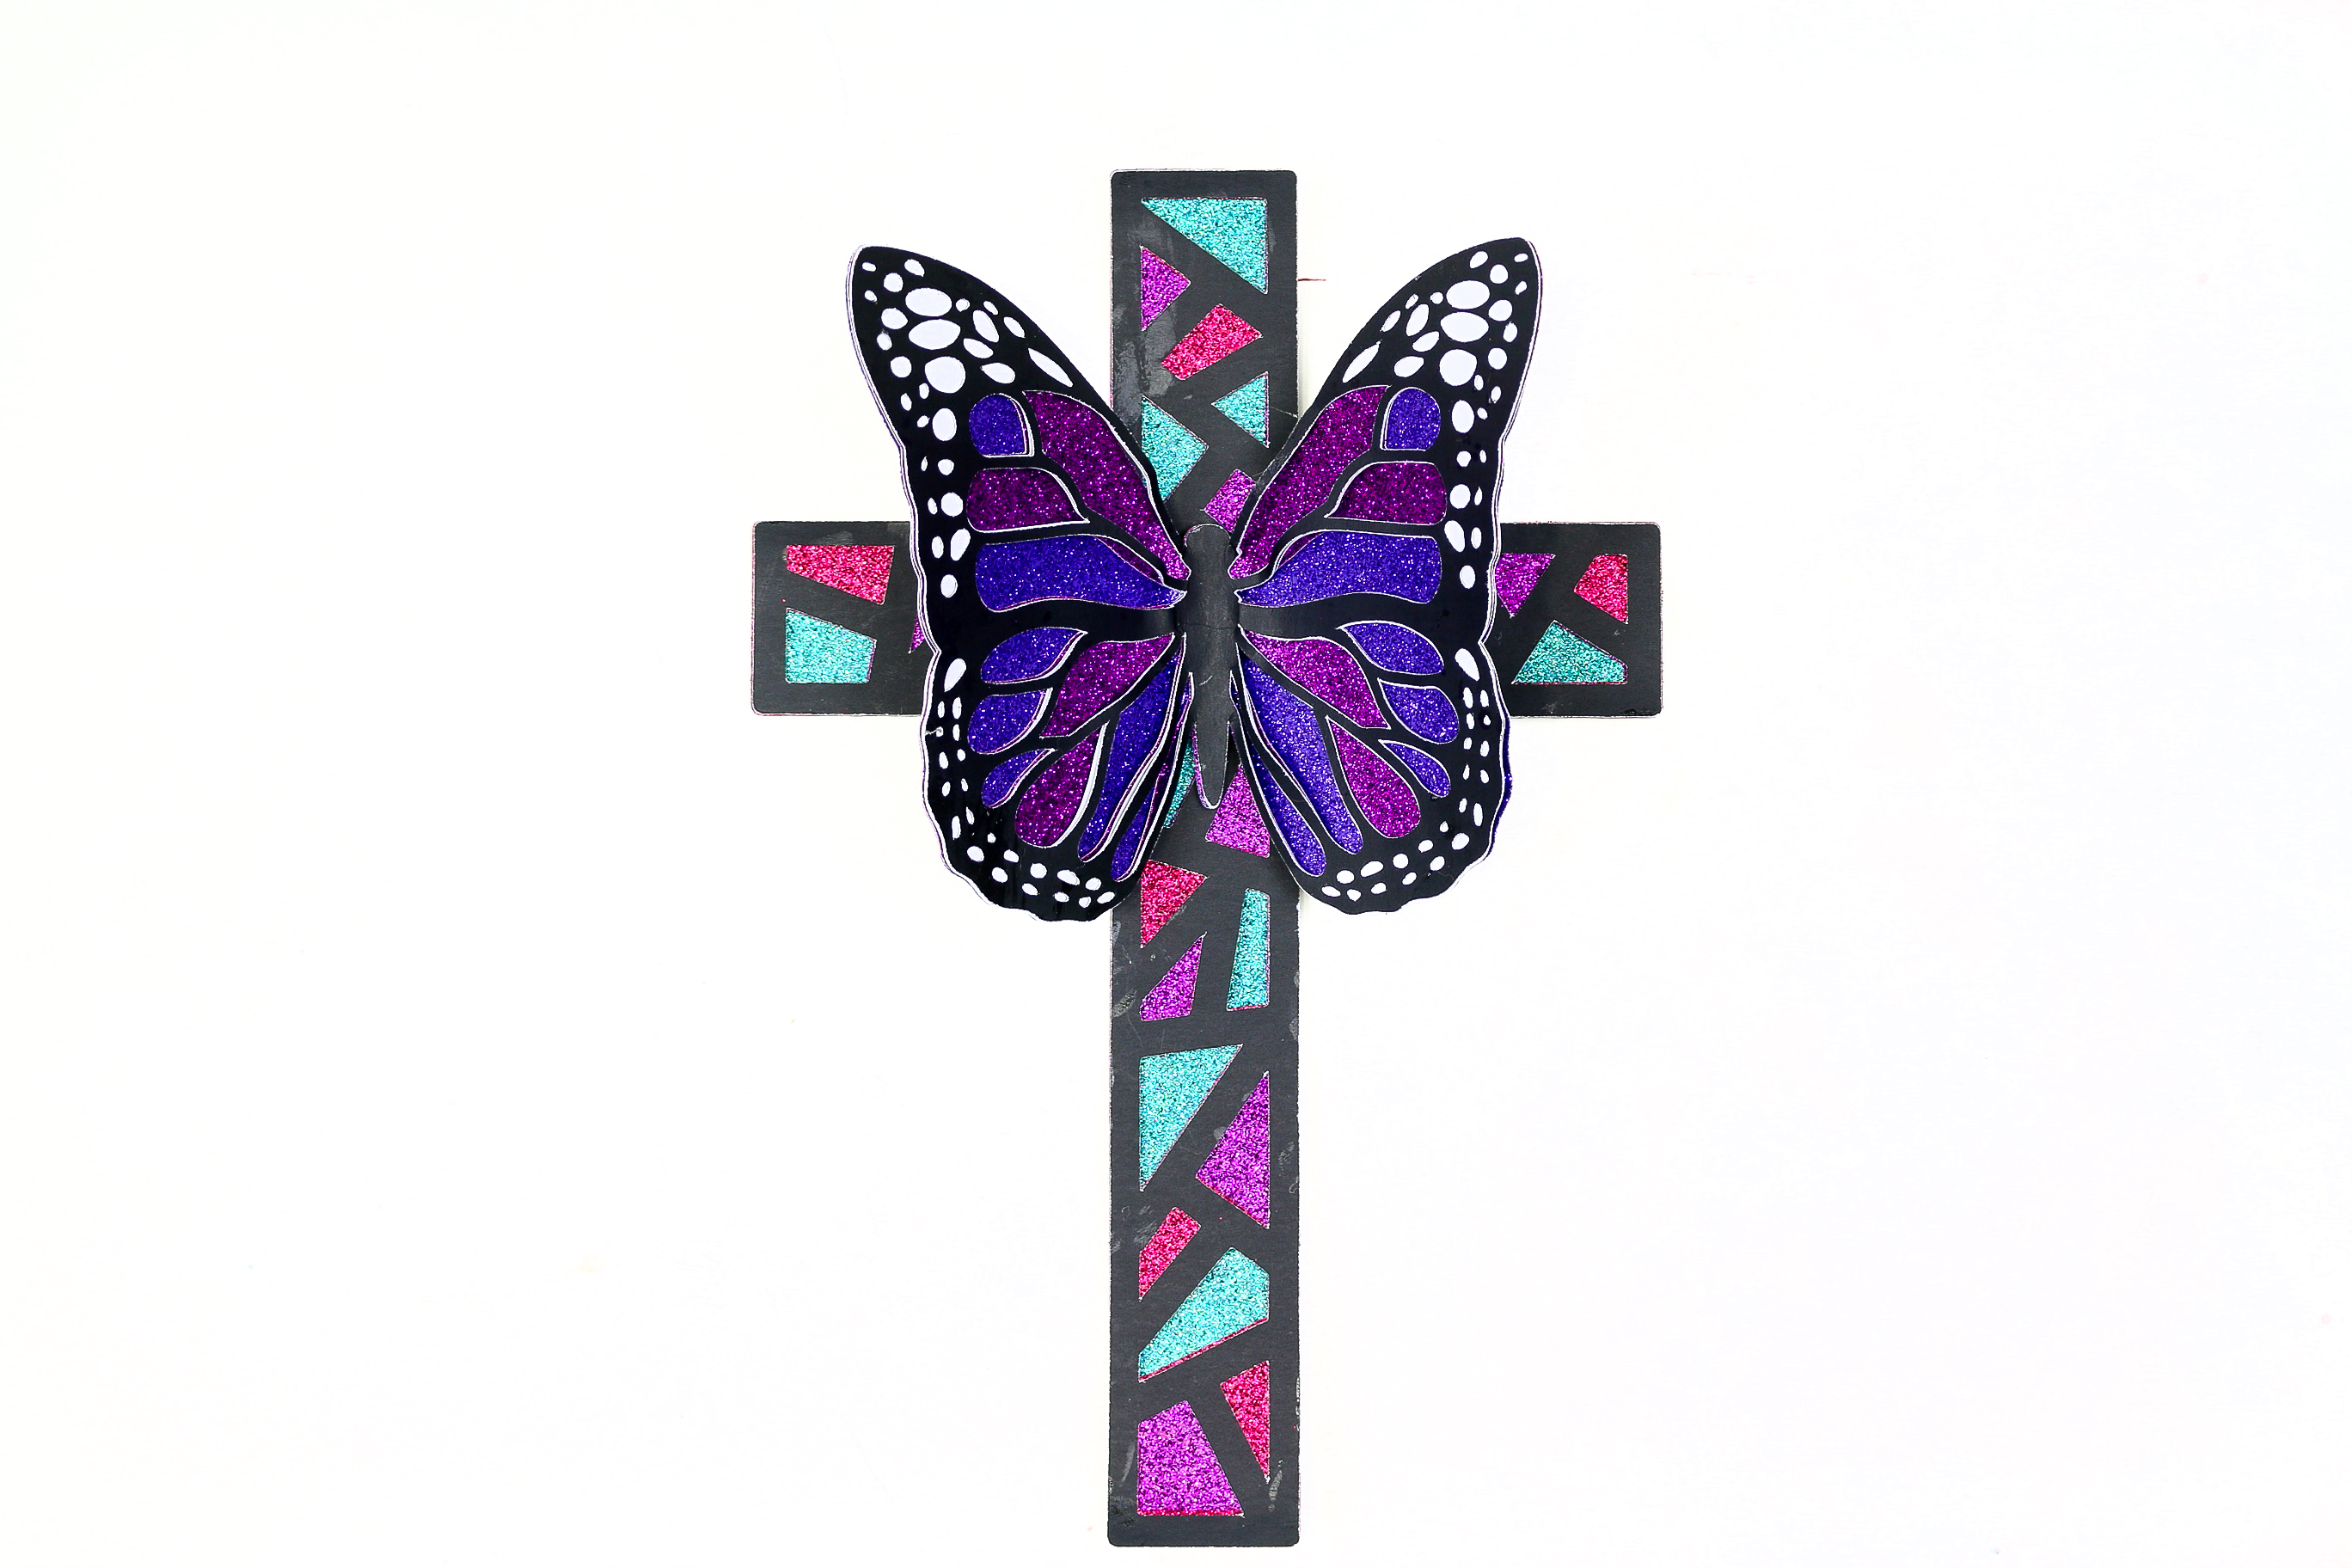 butterfly cross made with glitter paper